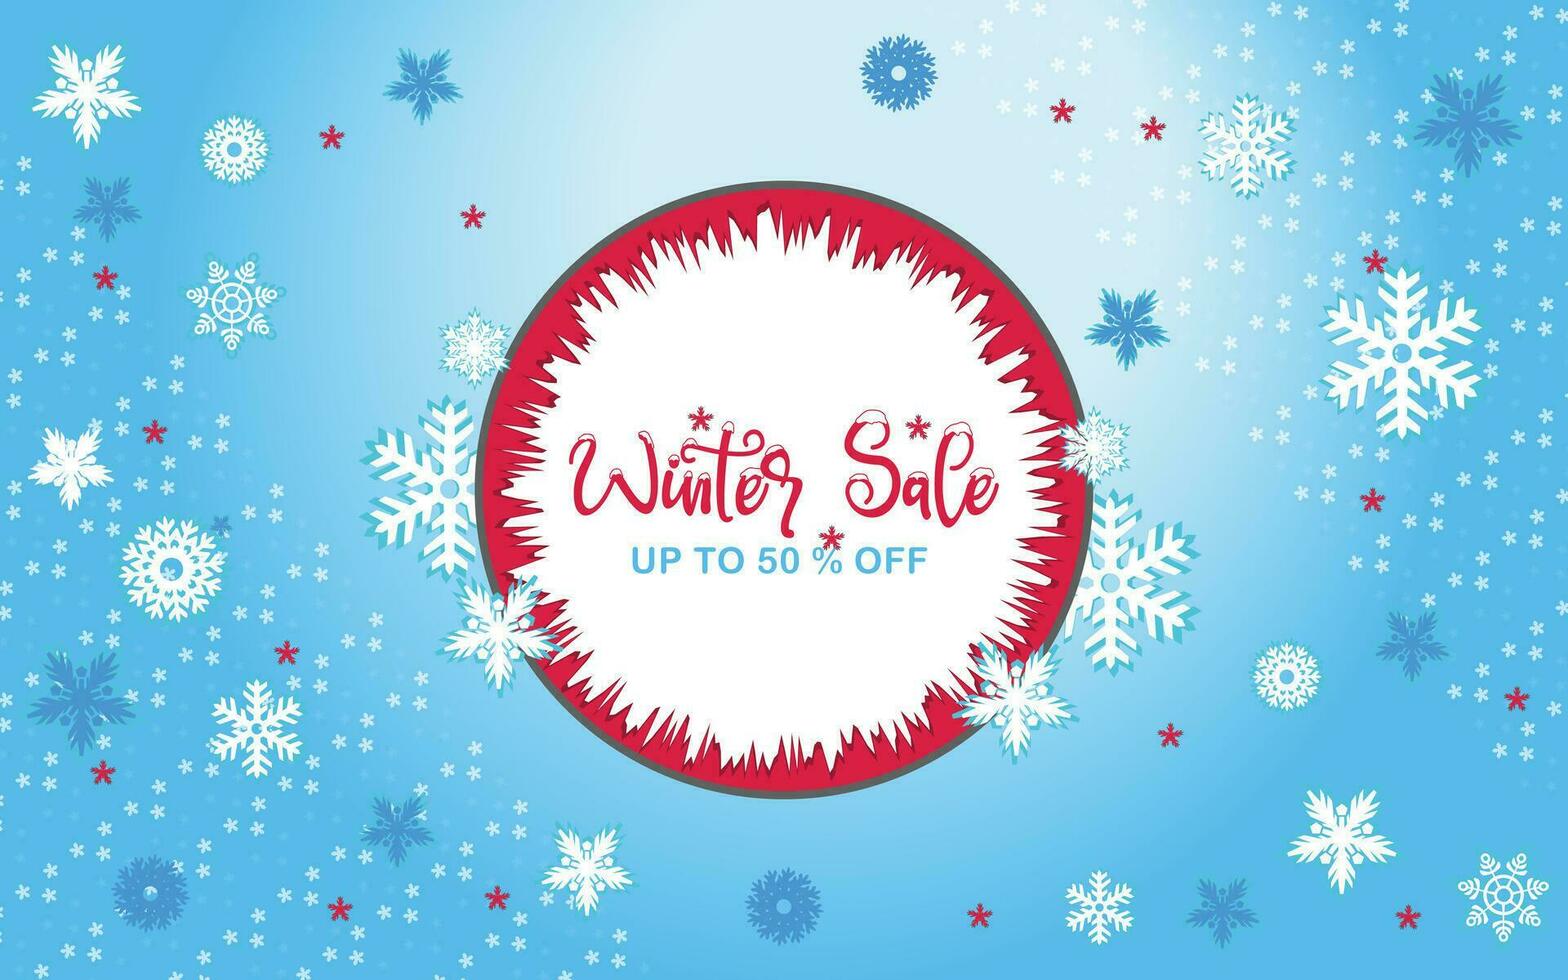 Free vector design winter sale special offer promo